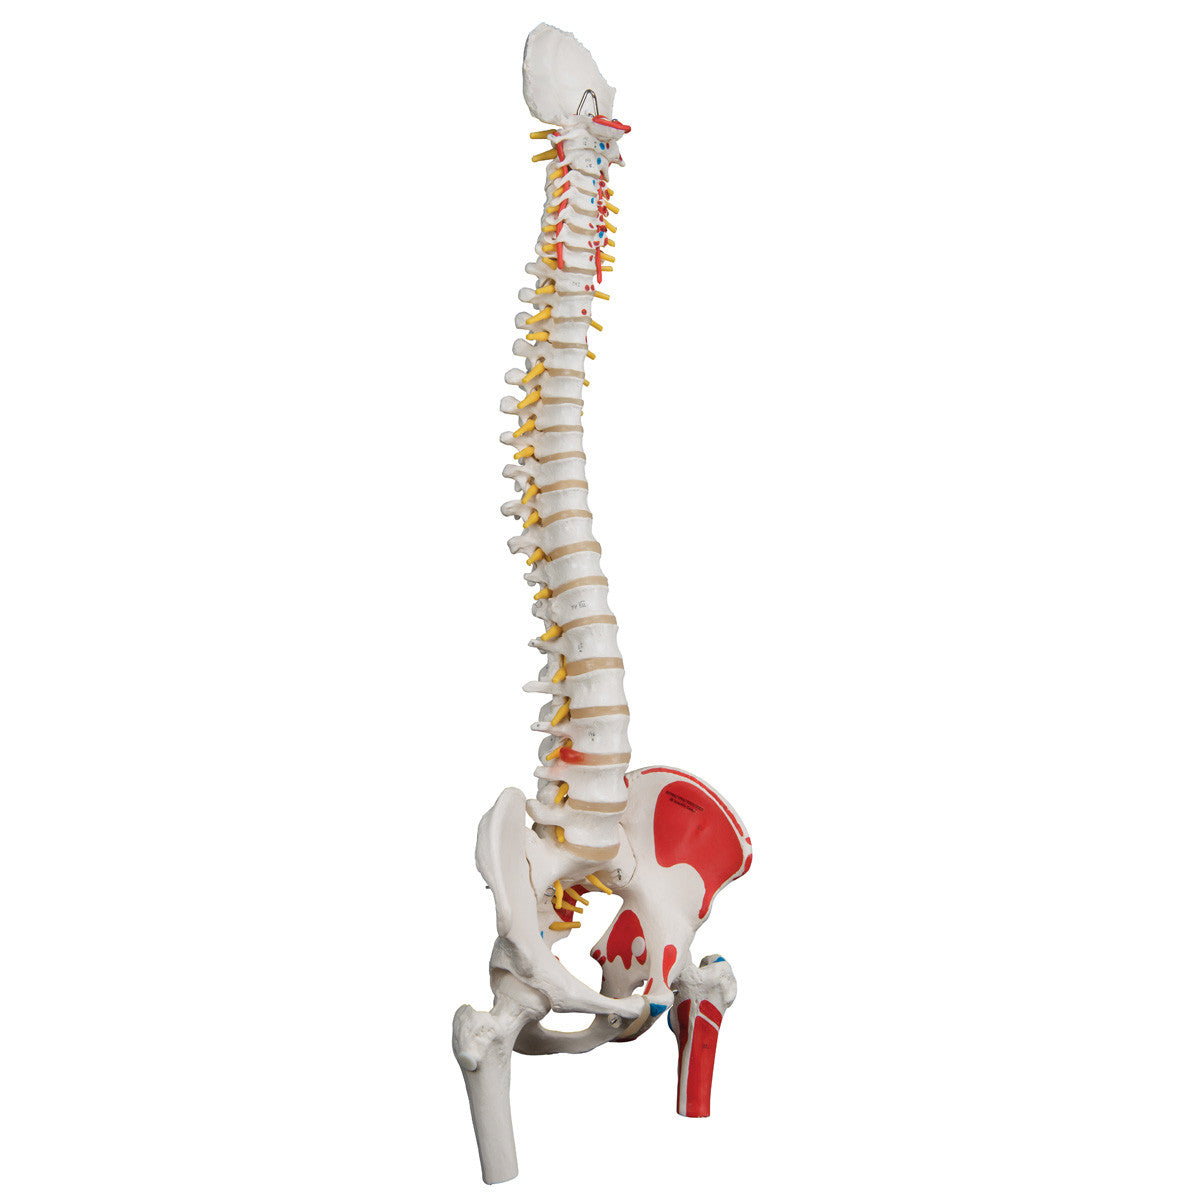 a58-3_02_1200_1200_classic-human-flexible-spine-model-with-femur-heads-painted-muscles-3b-smart-anatomy__60451.1589753010.1280.1280.jpg